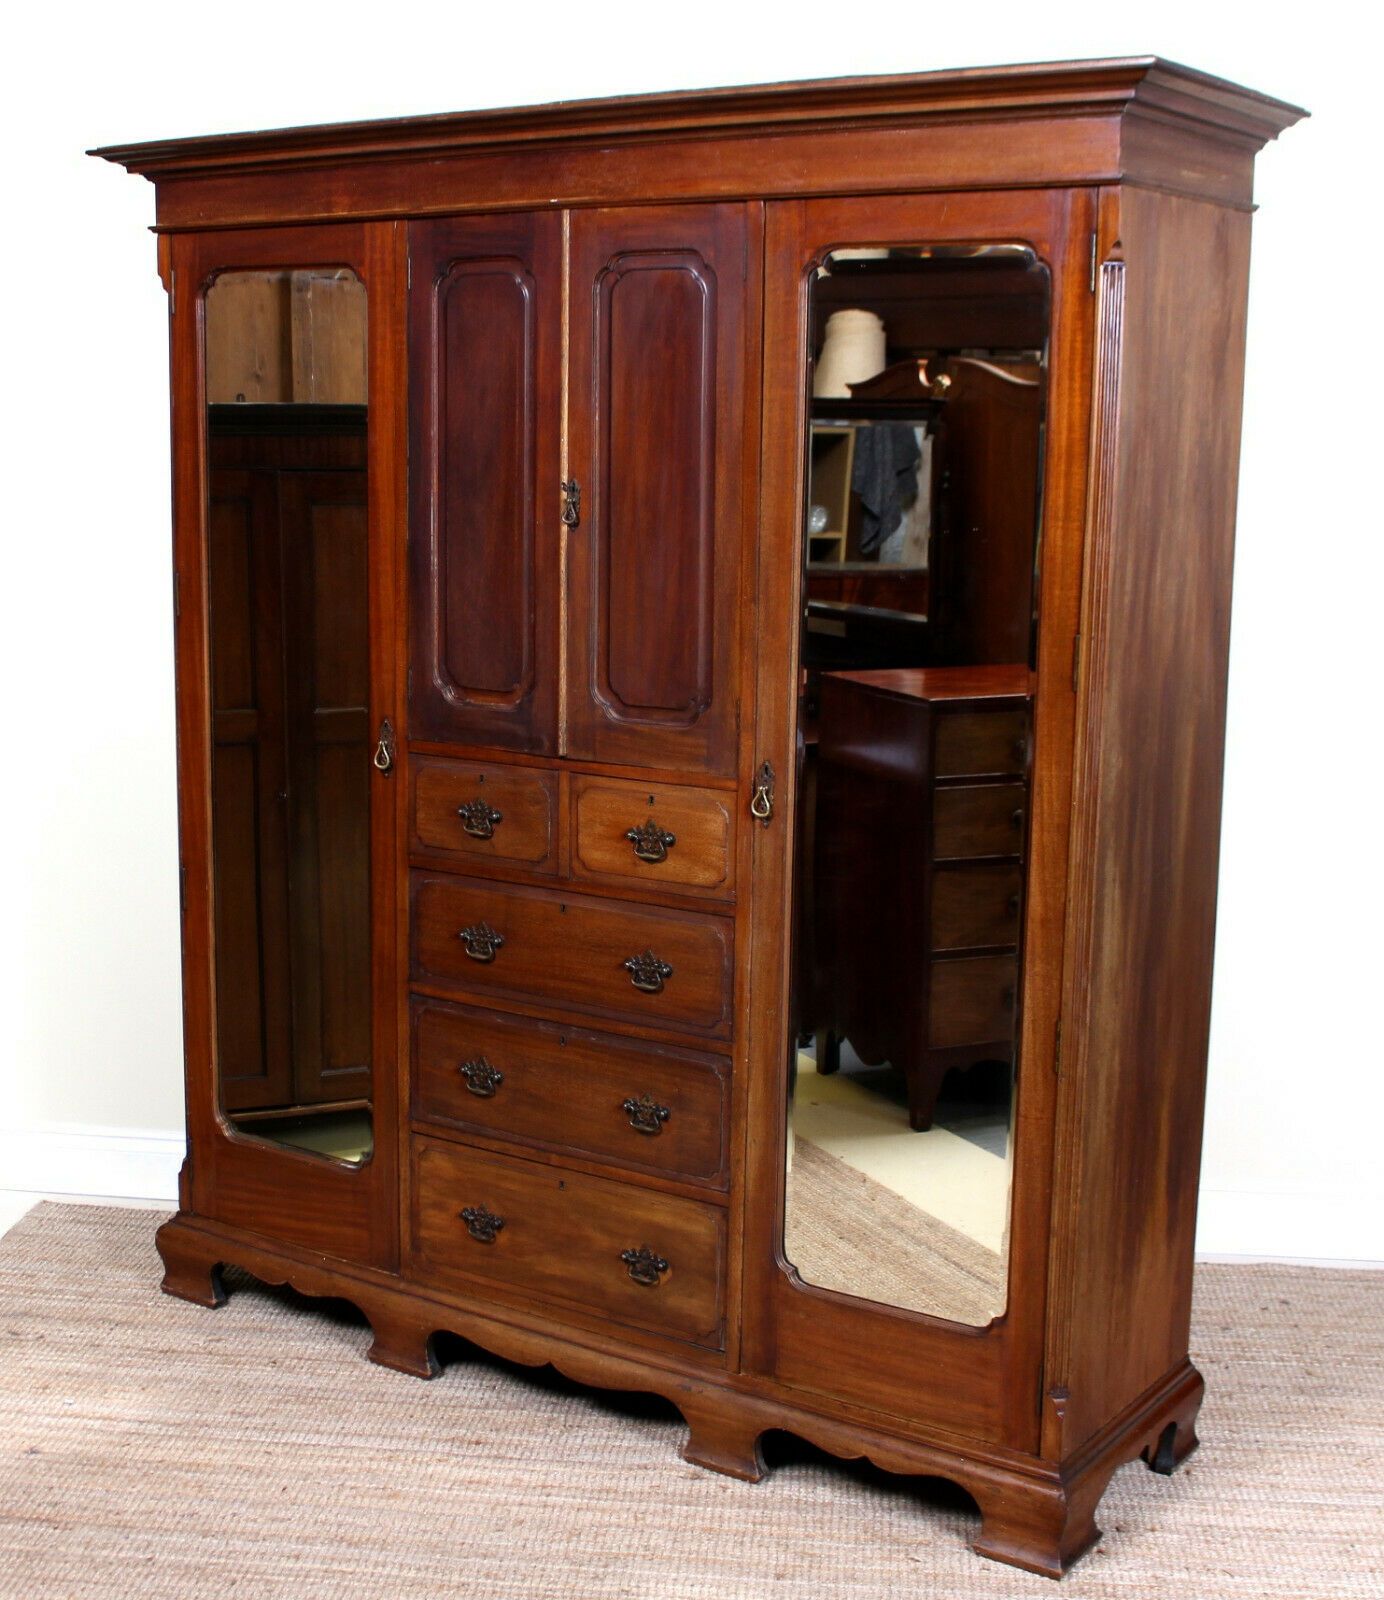 Antique Wardrobe Triple Compactum Mahogany Mirrored – Harper Baxter Throughout Antique Triple Wardrobes (View 7 of 15)